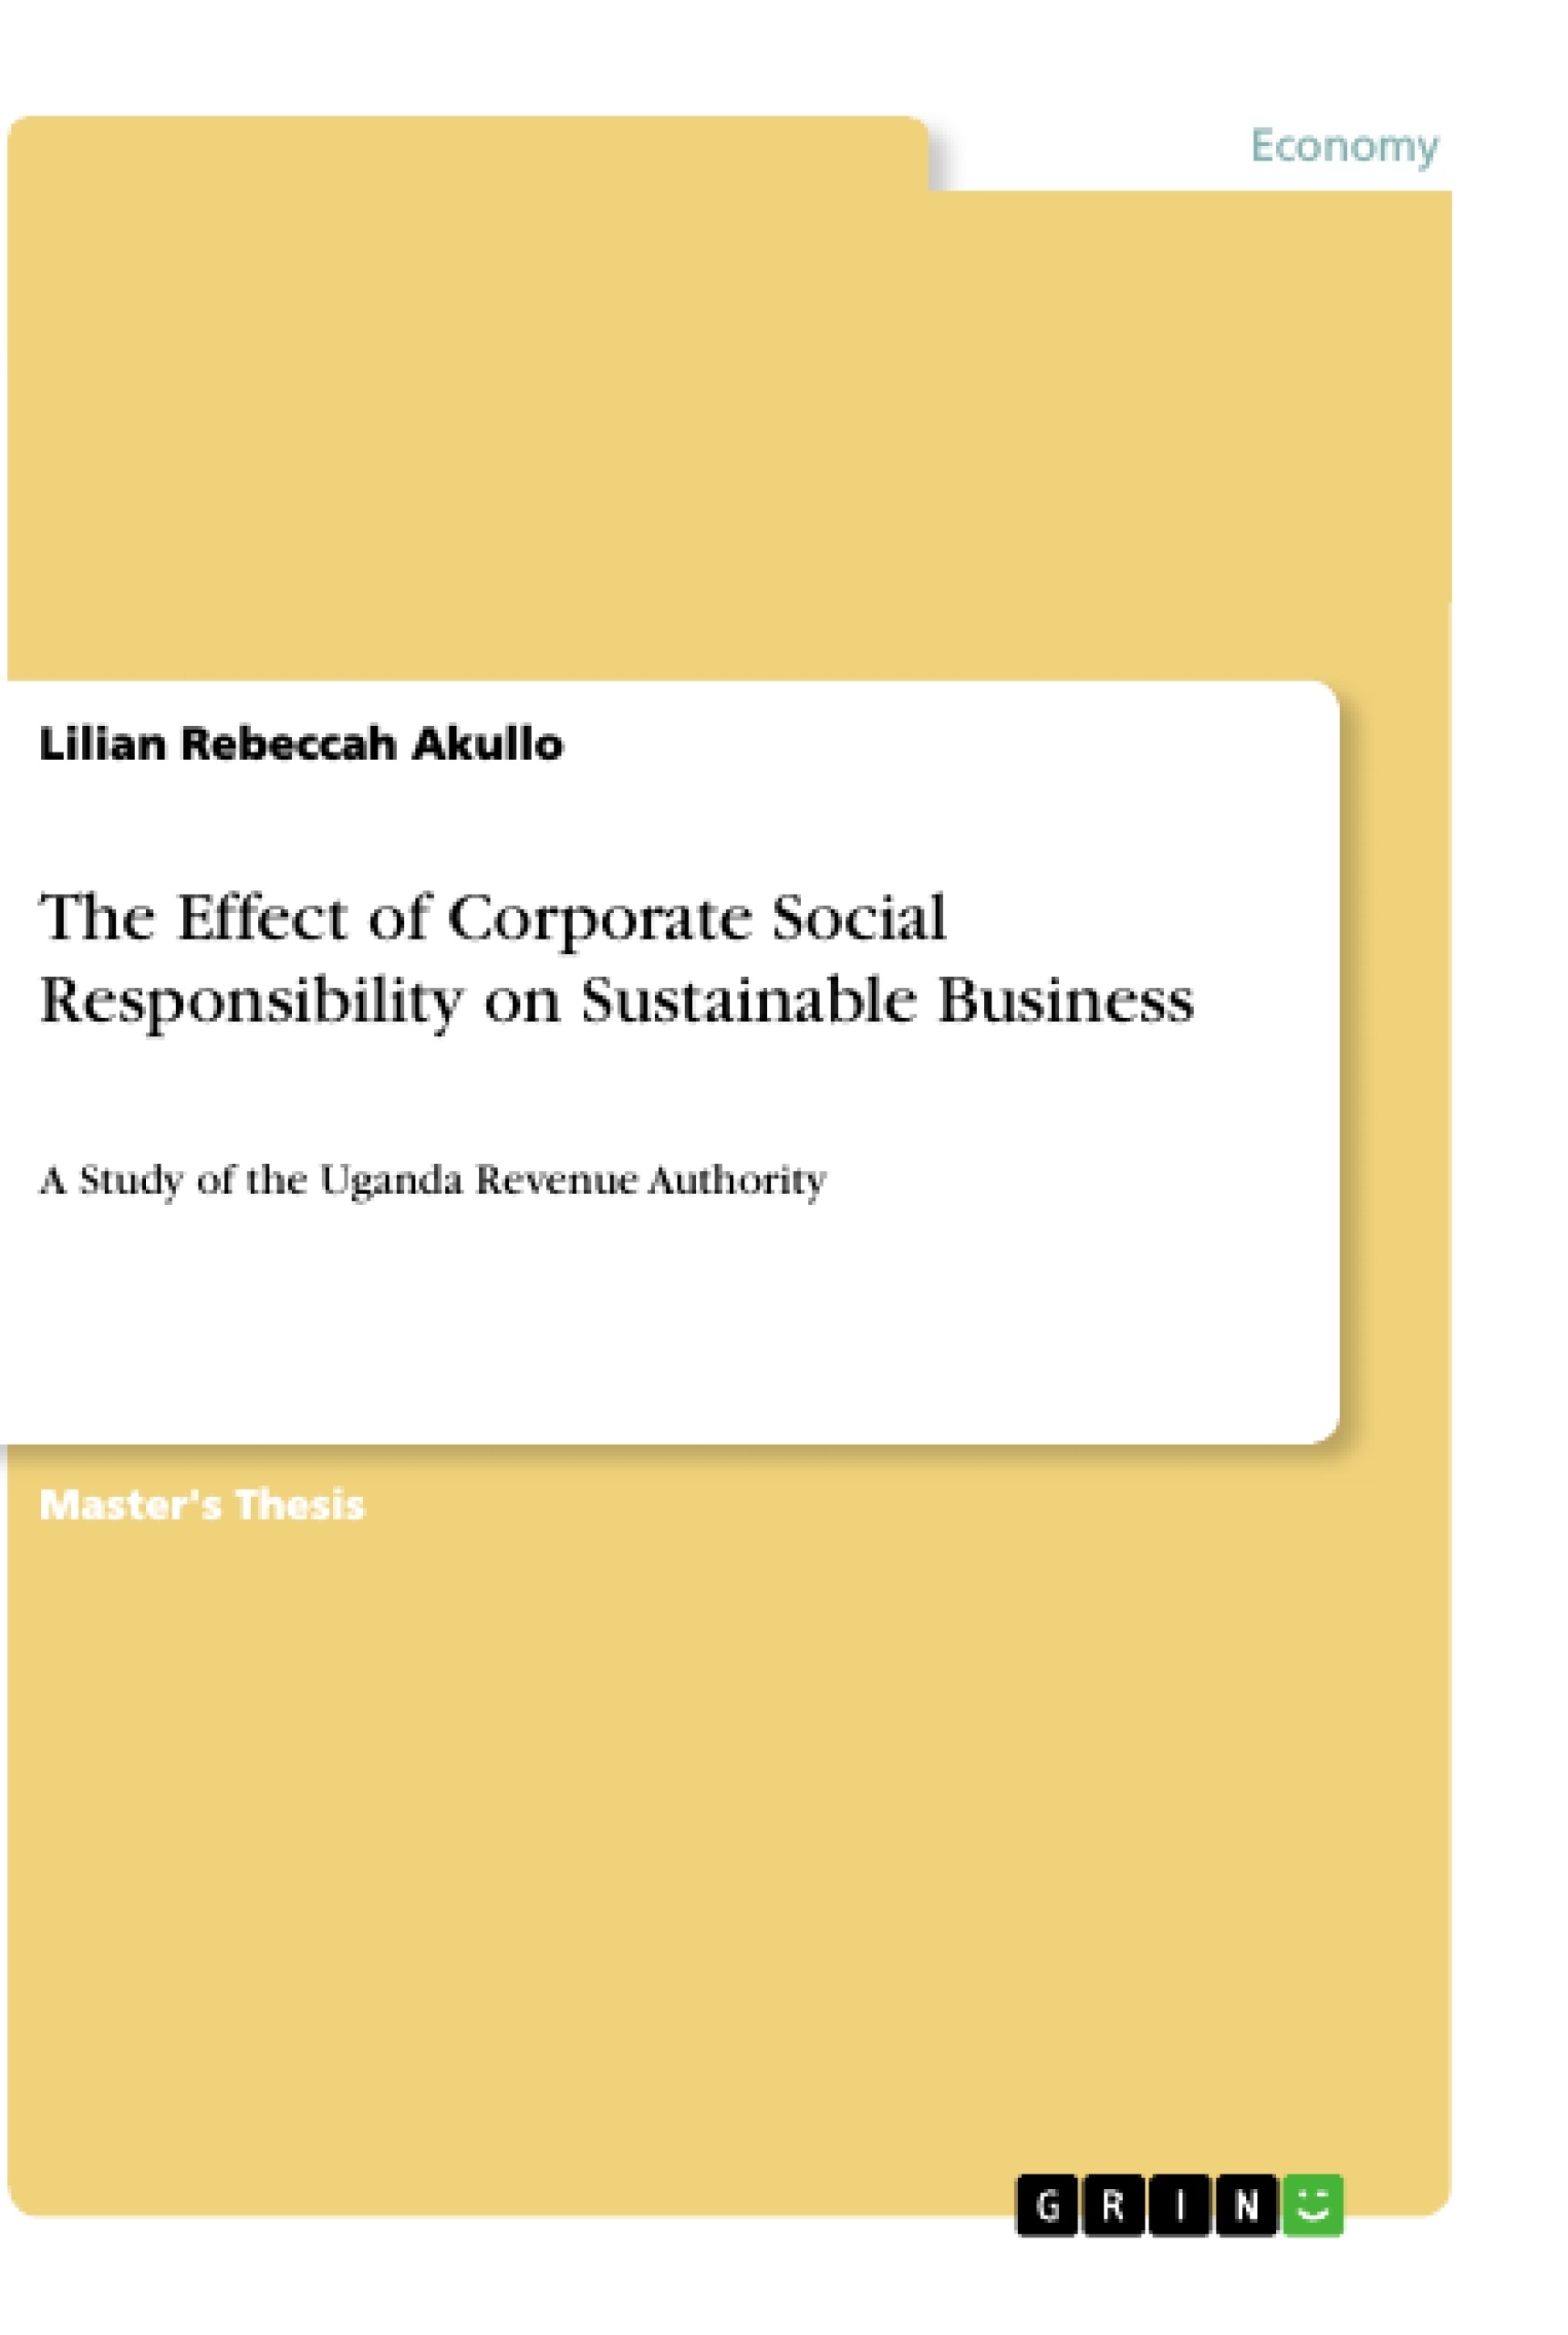 Title: The Effect of Corporate Social Responsibility on Sustainable Business